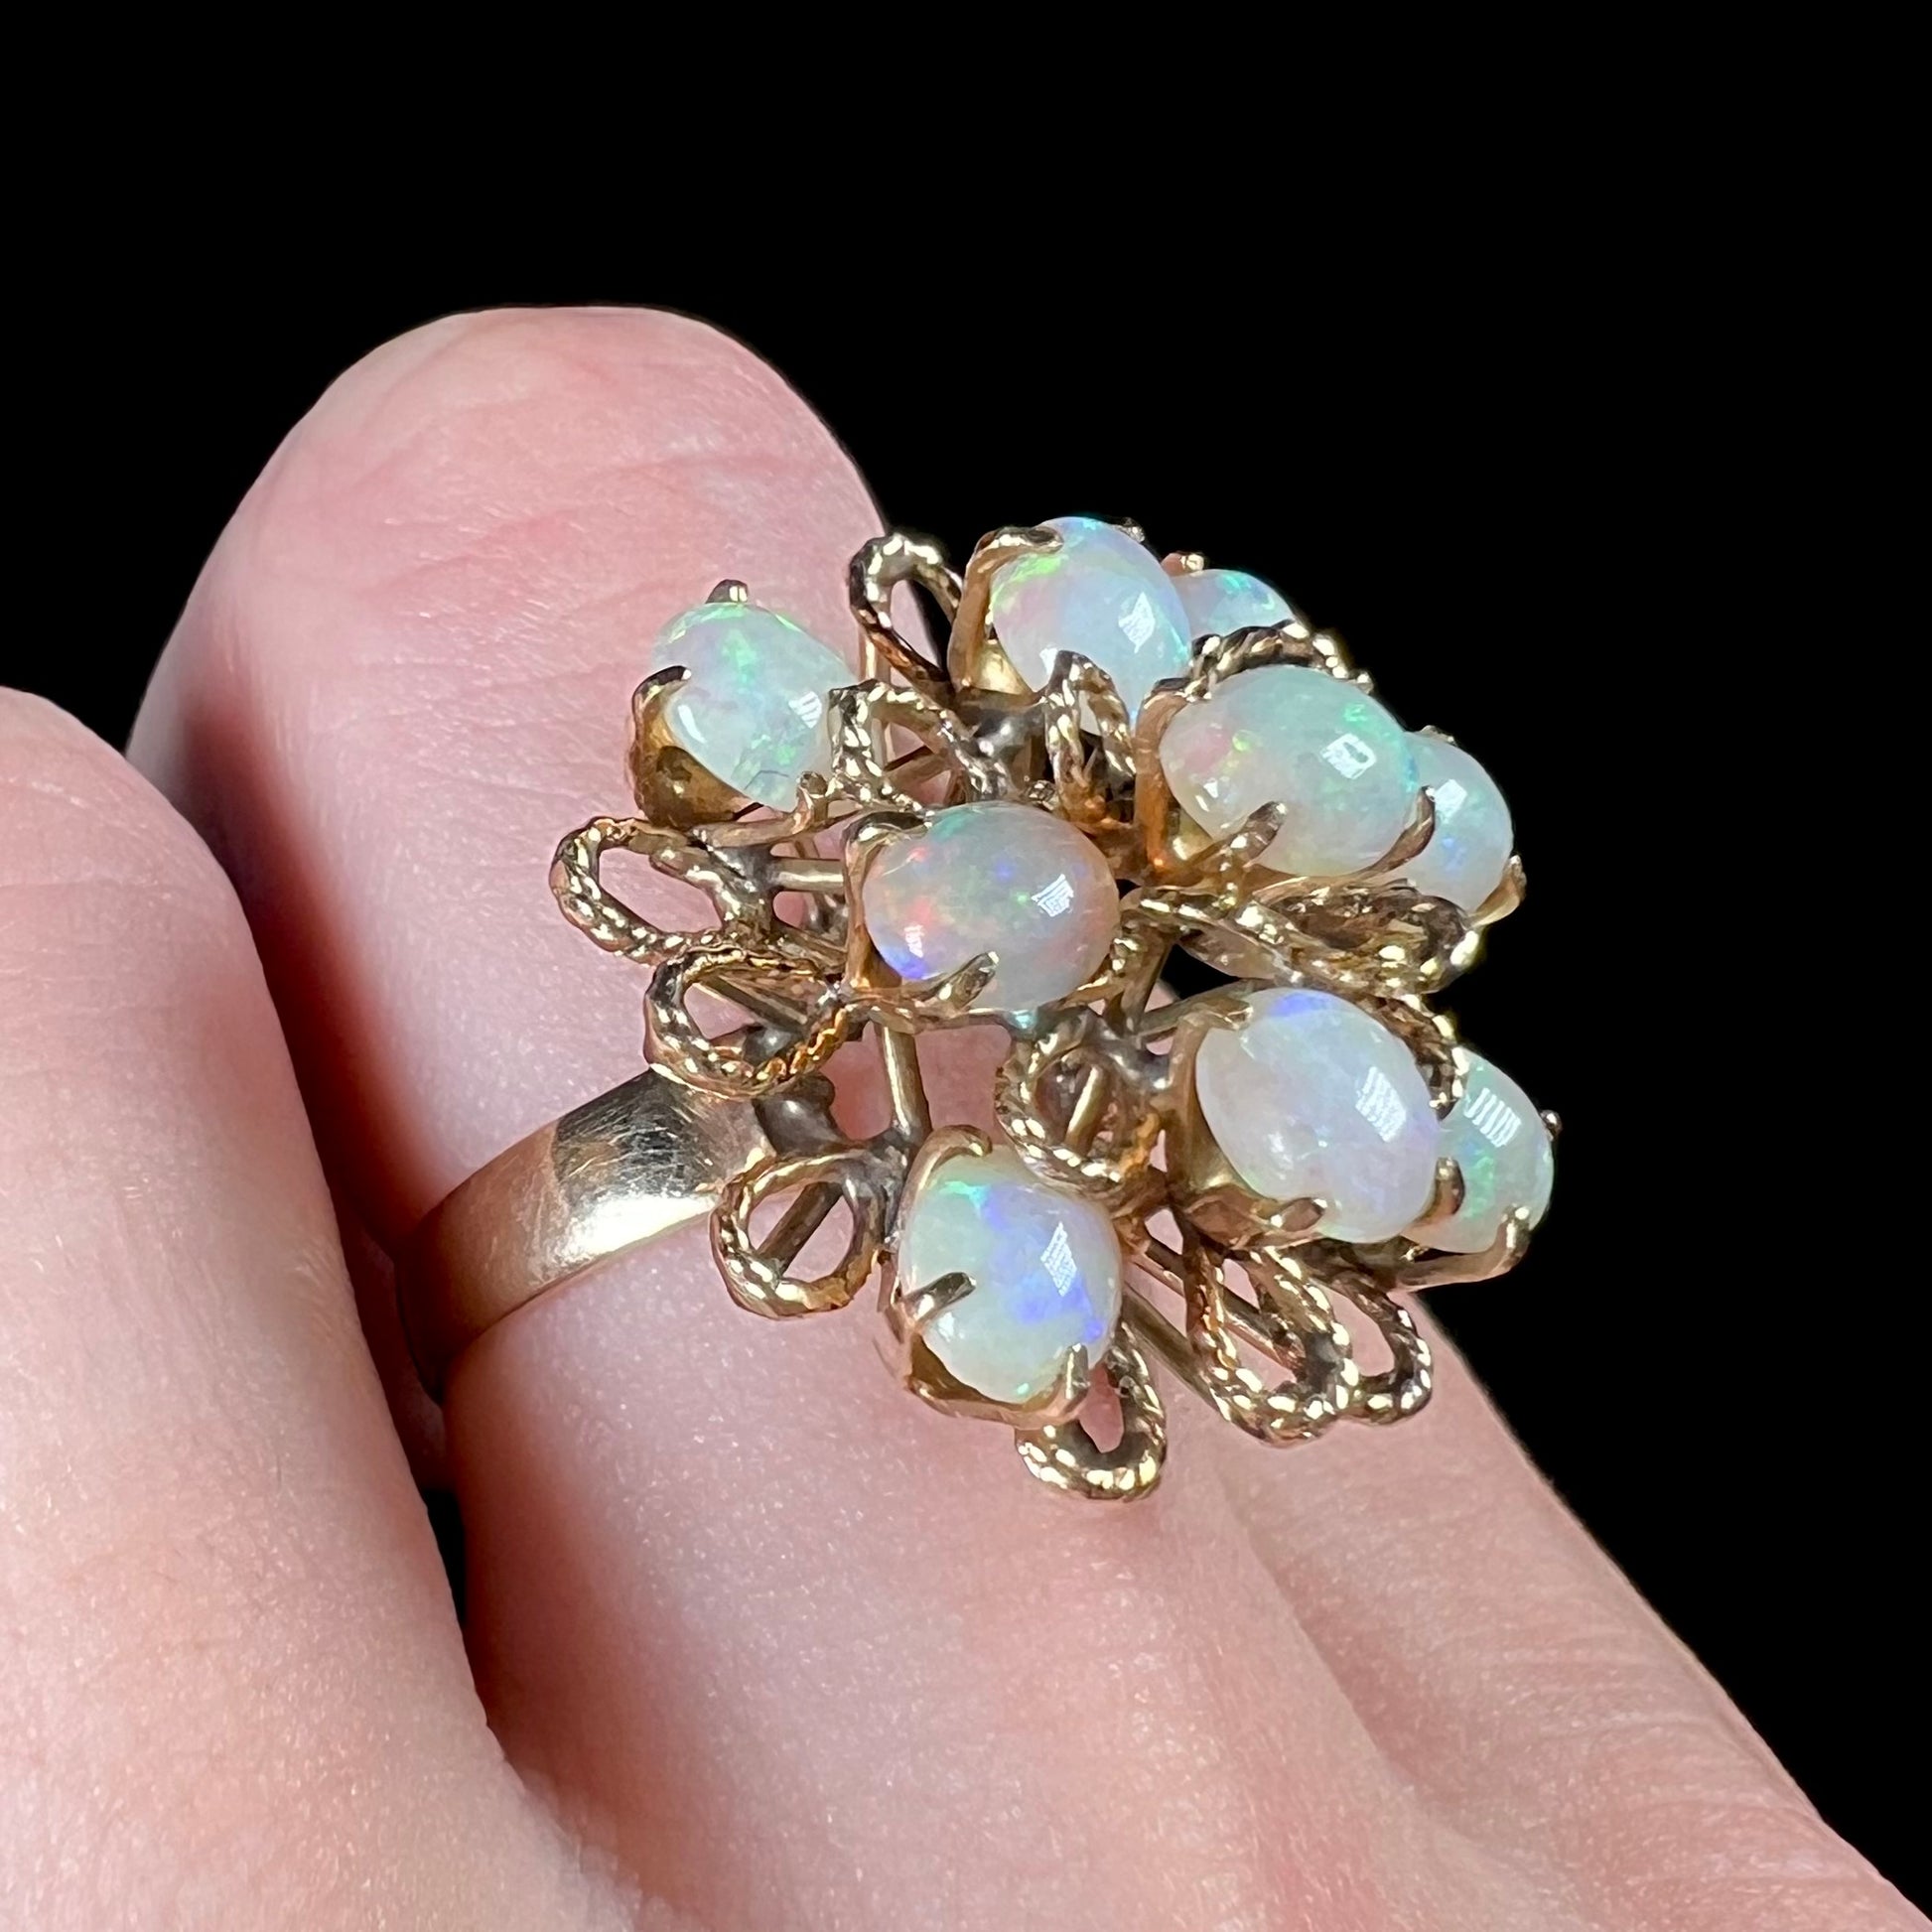 A ladies' yellow gold opal cluster ring.  The ring is an atomic motif, handmade in the mid-century modern style.